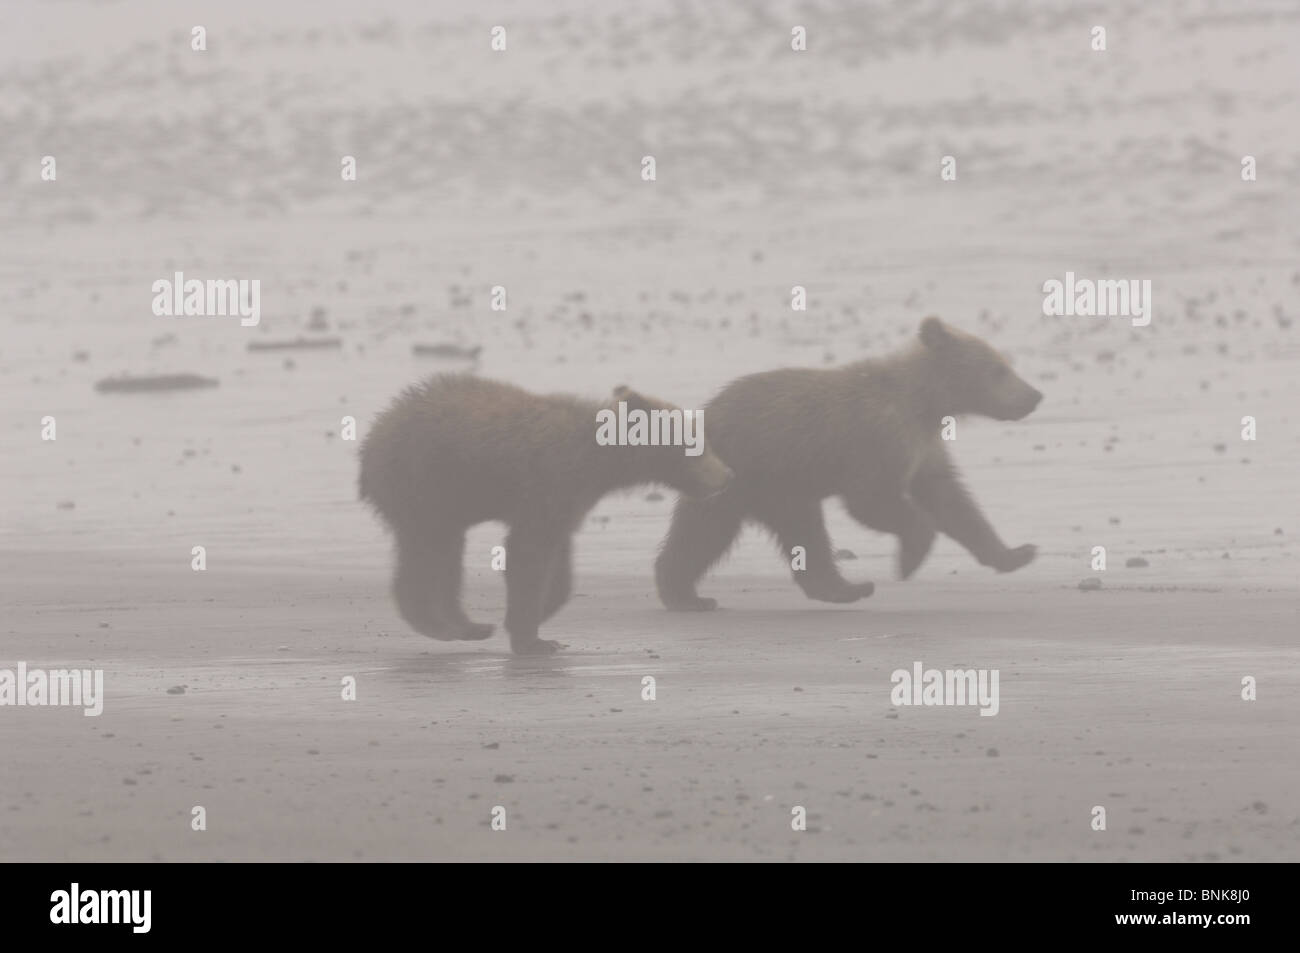 Stock photo of two Alaskan brown bear cubs running across a beach in the fog. Stock Photo